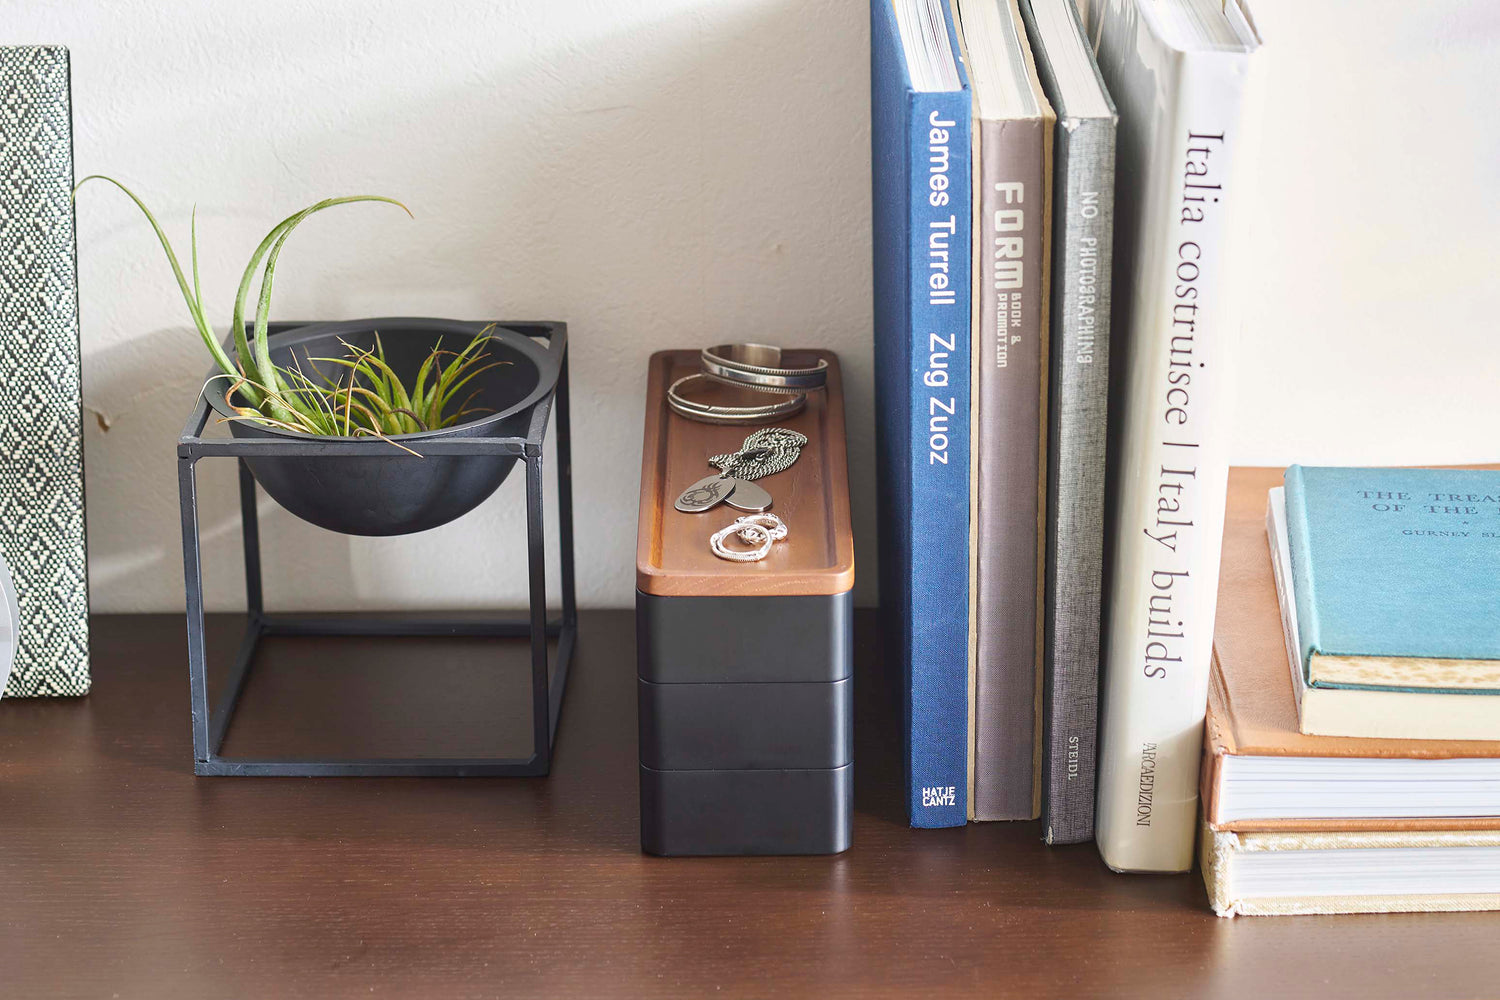 View 12 - Closed black Stacking Watch and Accessory Case in between books and plants with jewelry on top